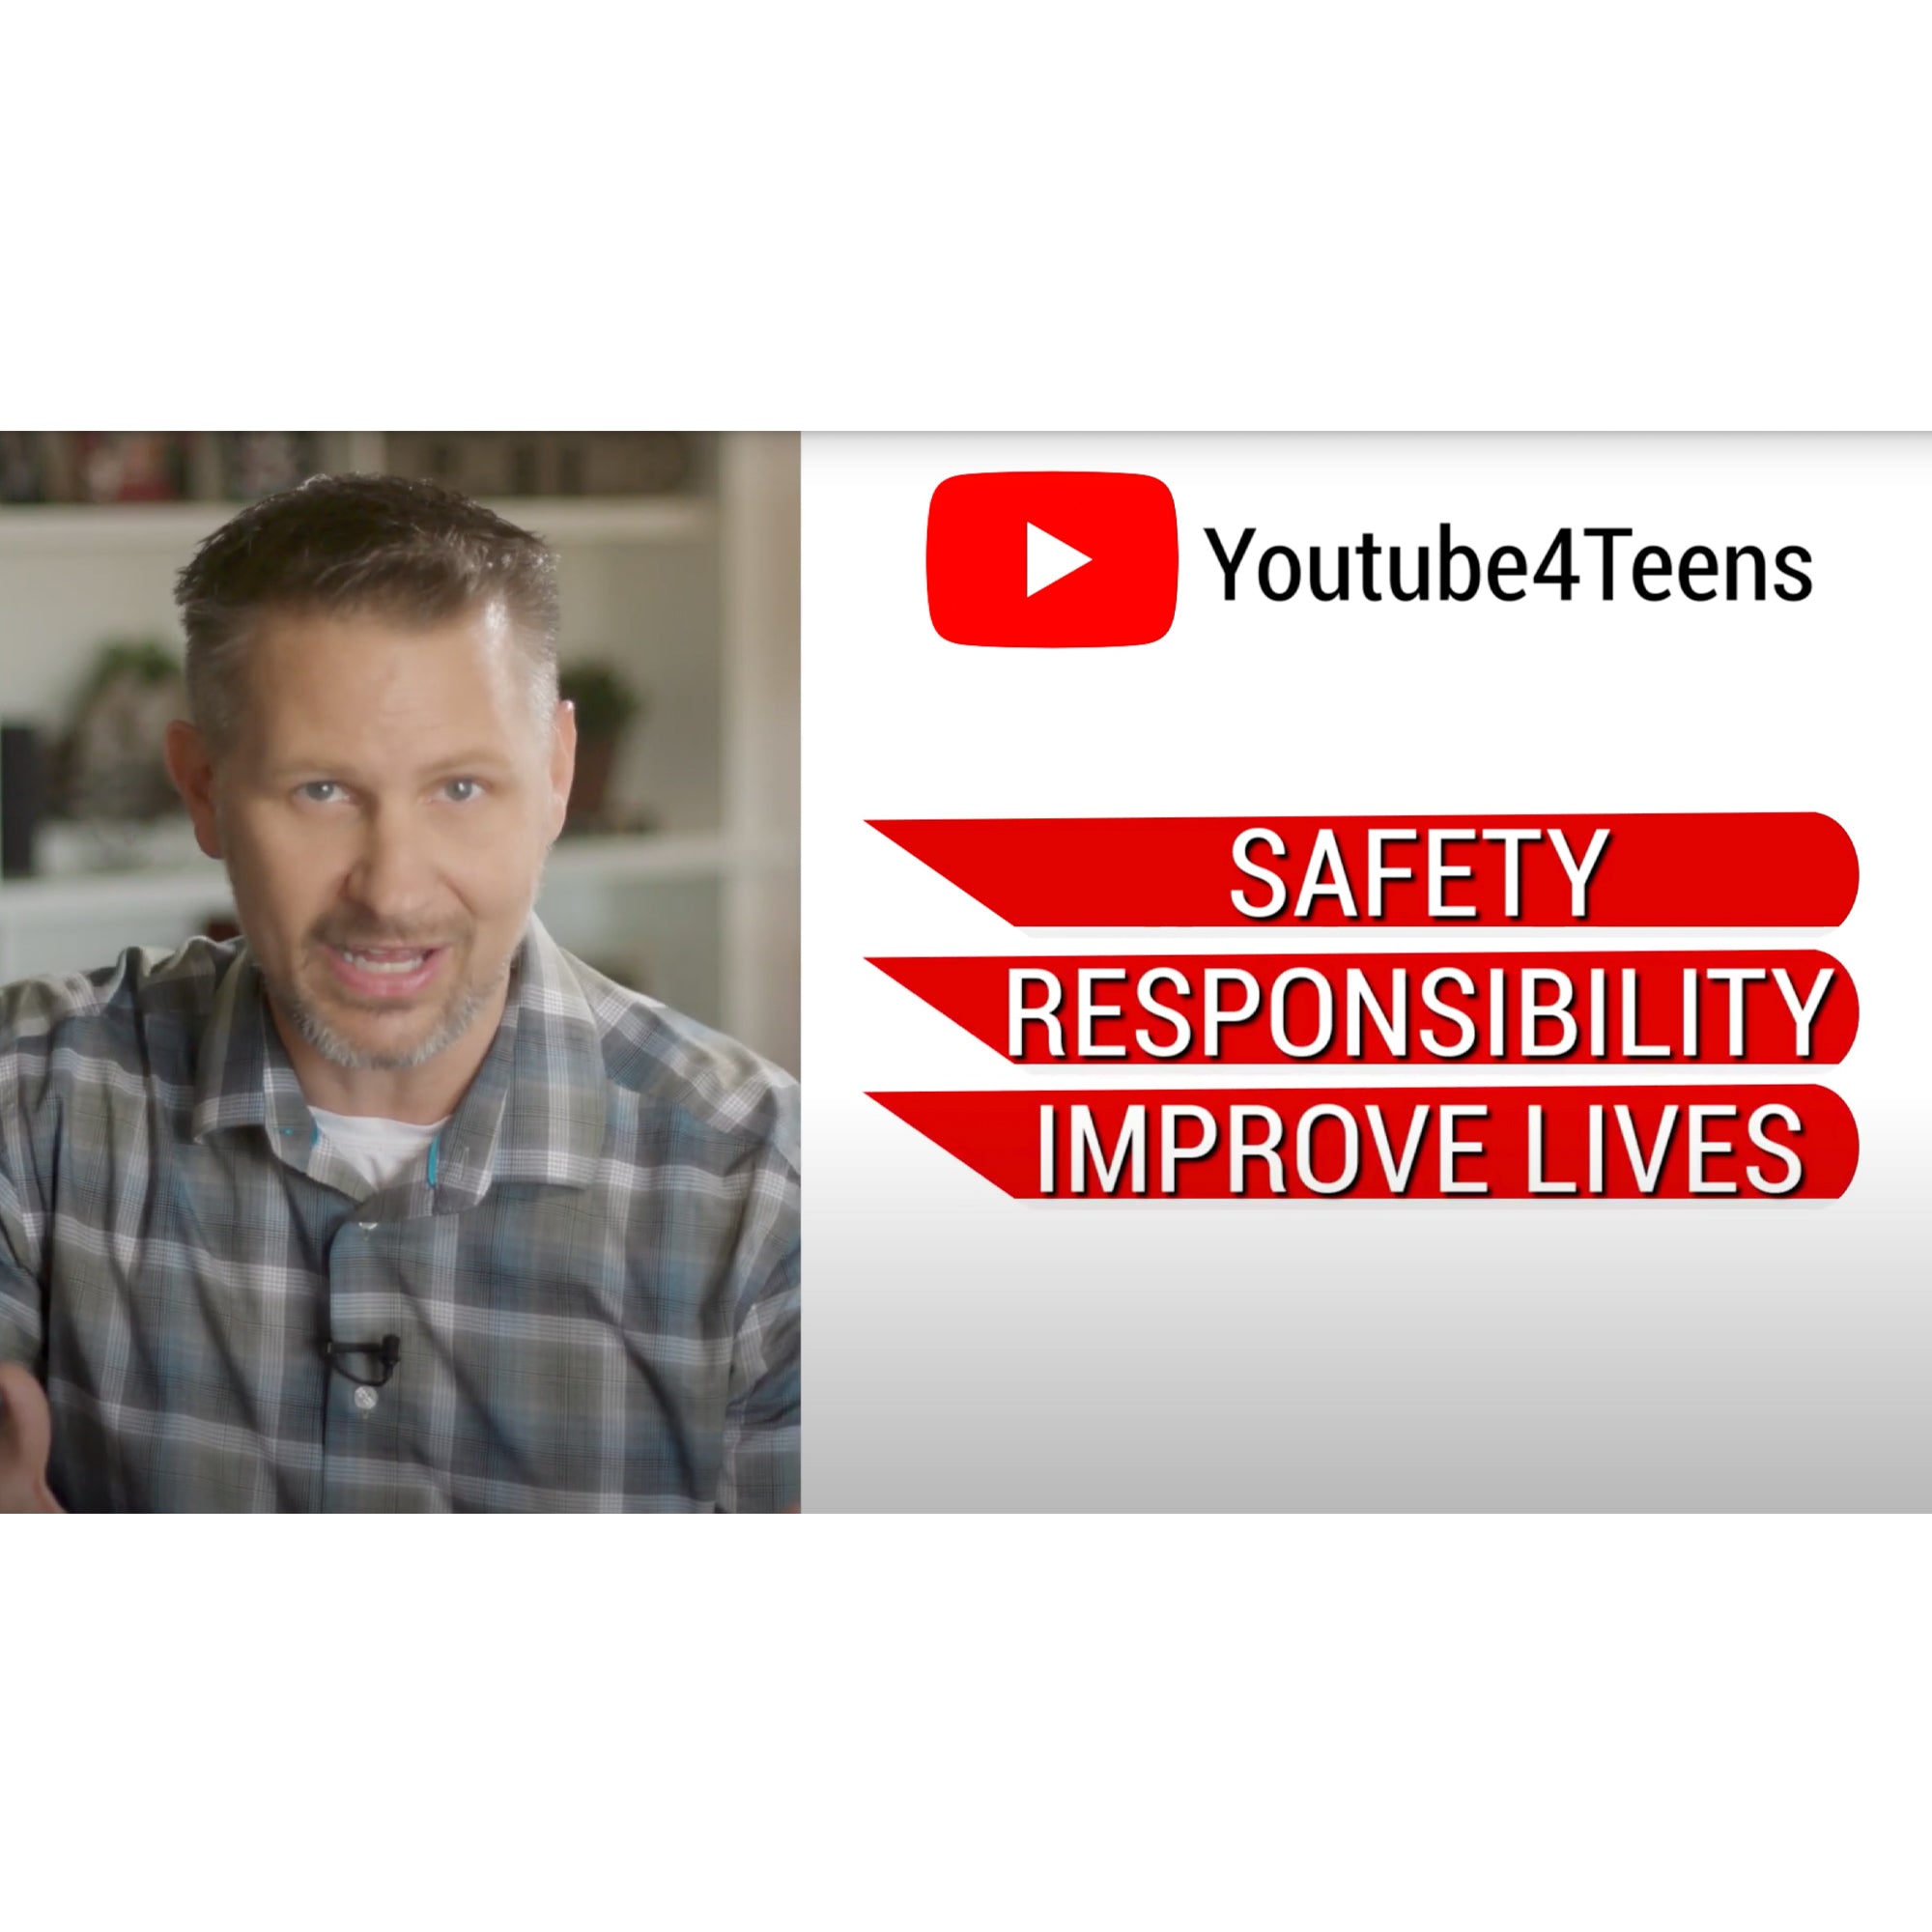 A YouTube 4 Teens screenshot of a gray-haired man, mid-sentence, wearing a plaid shirt with a living room behind him out of focus. To the right is a white background with red bars with the words “safety,” “responsibility,” and “improve lives” written in the red bars. At the top is the YouTube logo with the title “Youtube 4 teens.”